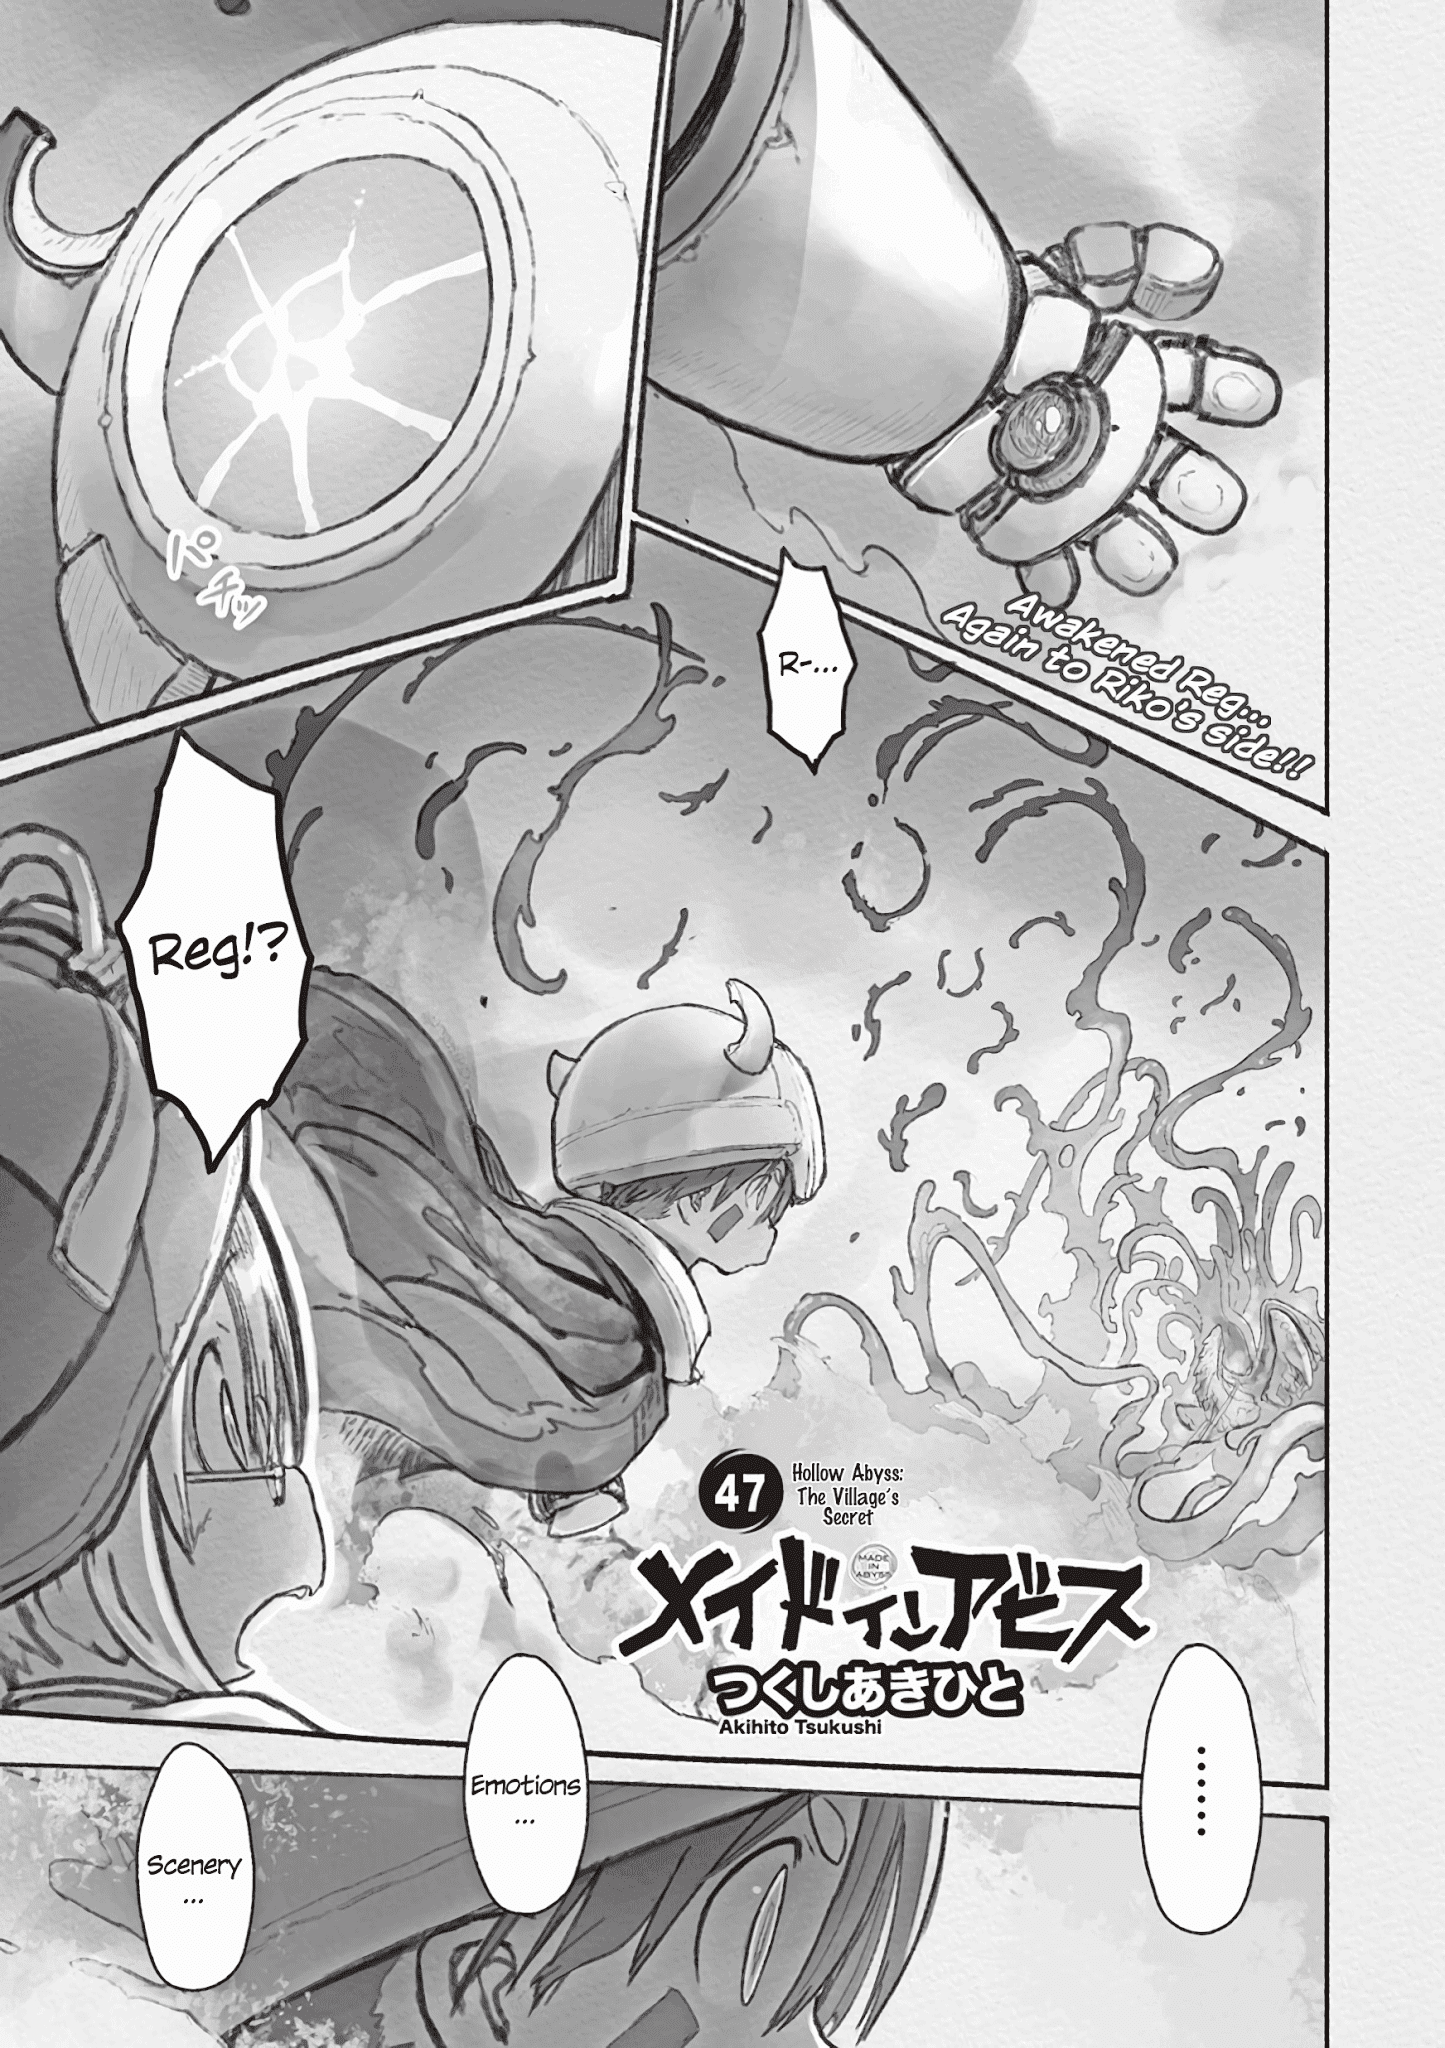 Offical Made in Abyss character heights translated. : r/MadeInAbyss